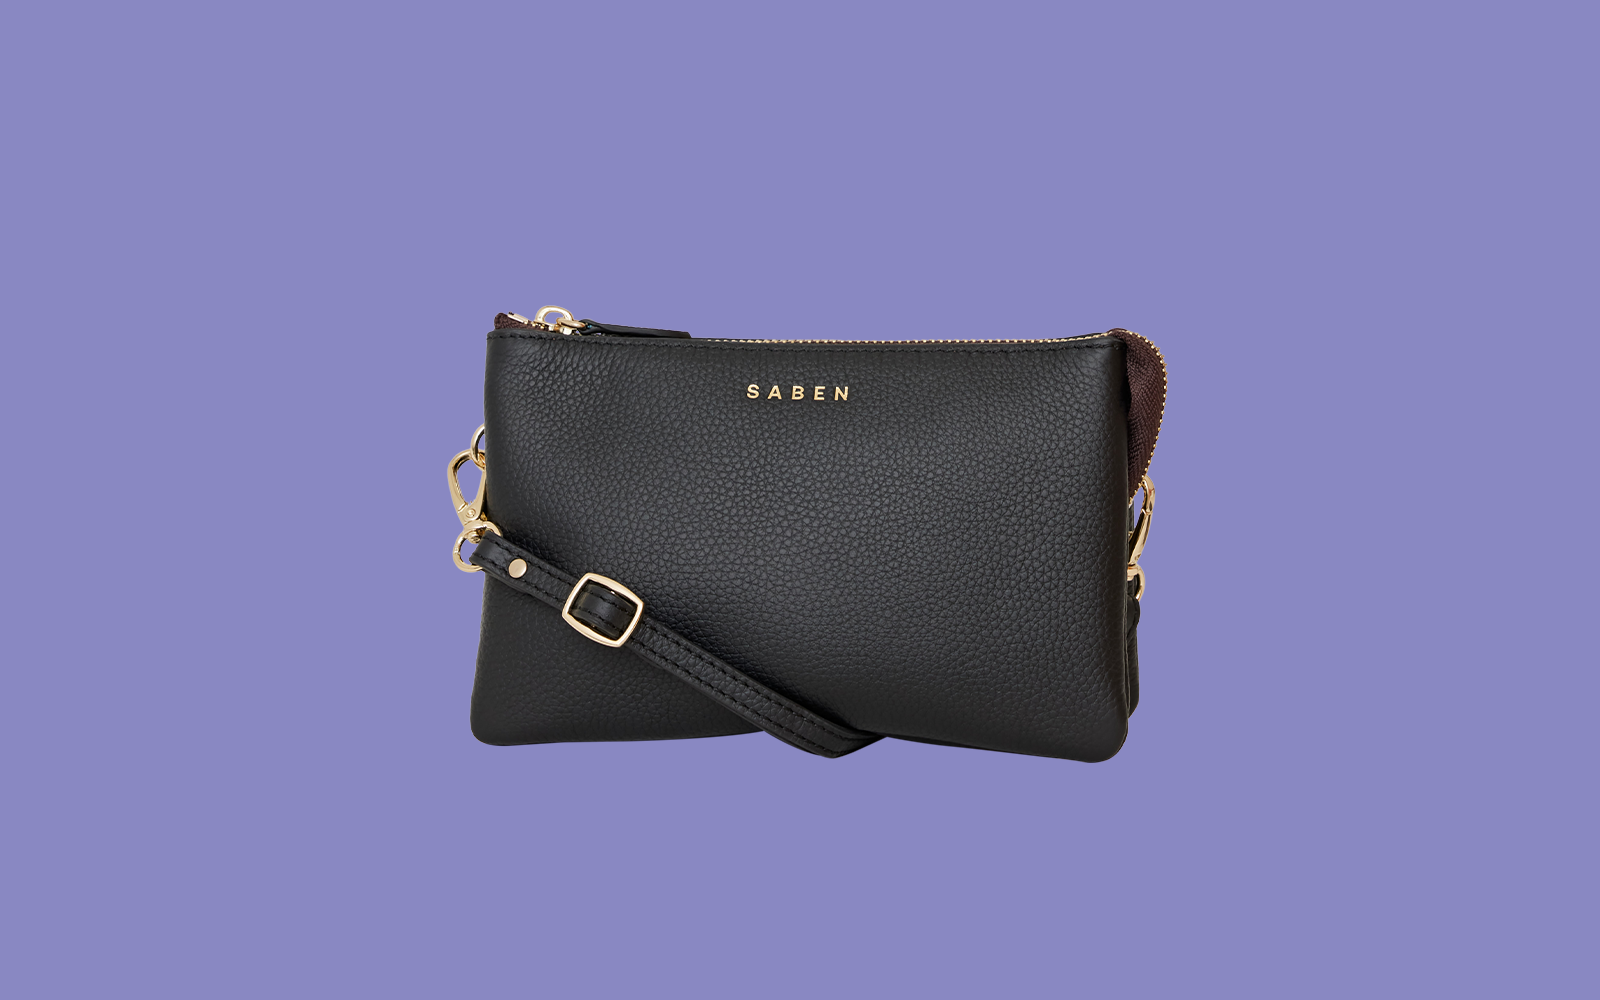 Sign up to the Woman’s Day newsletter and you could win a Saben Tilly bag